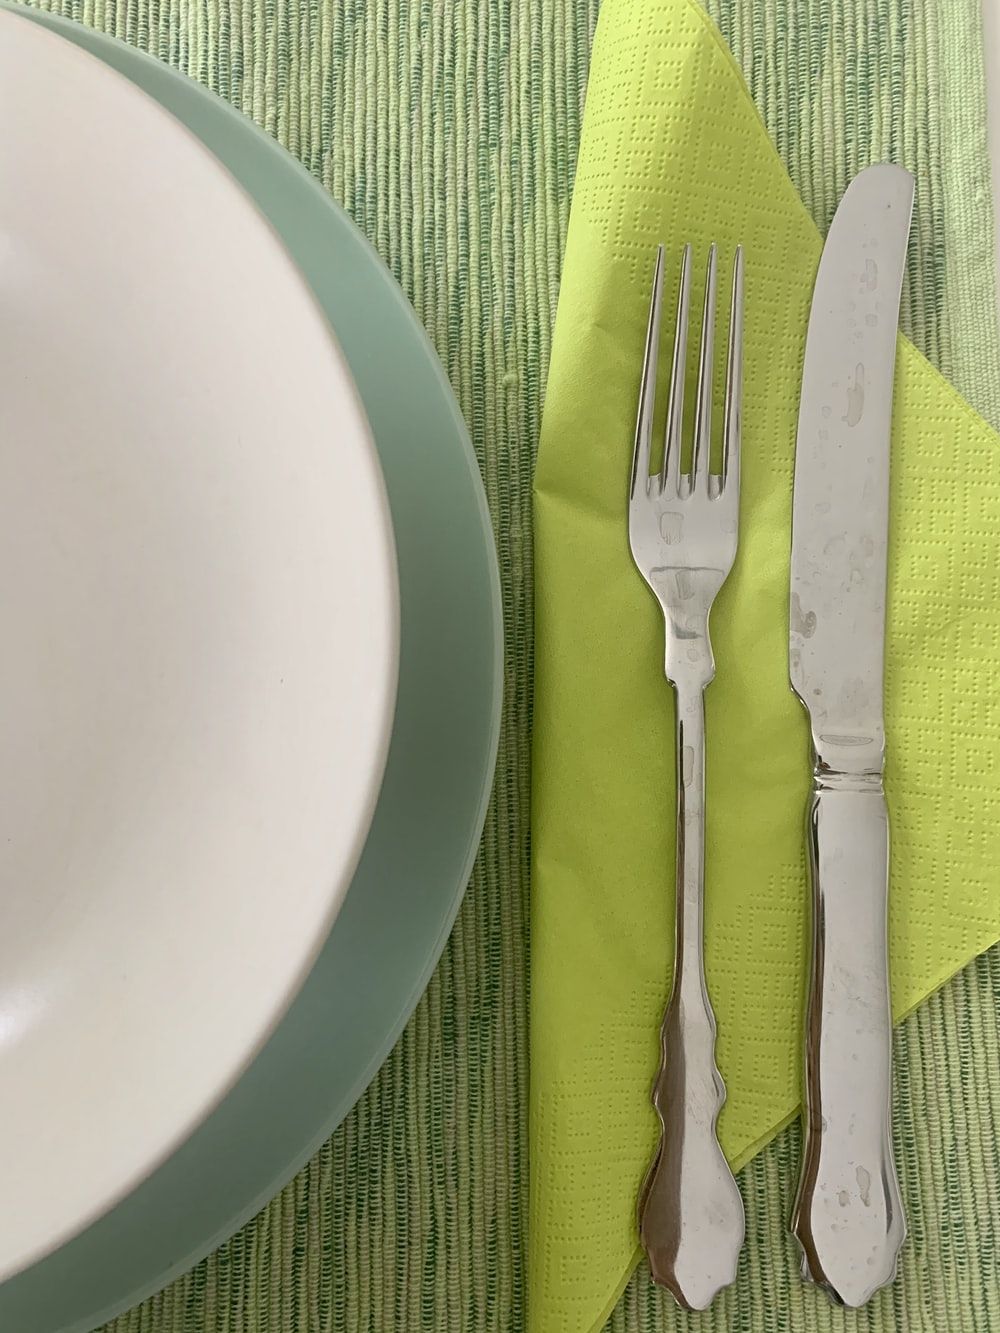 Knife And Fork Picture. Download Free Image